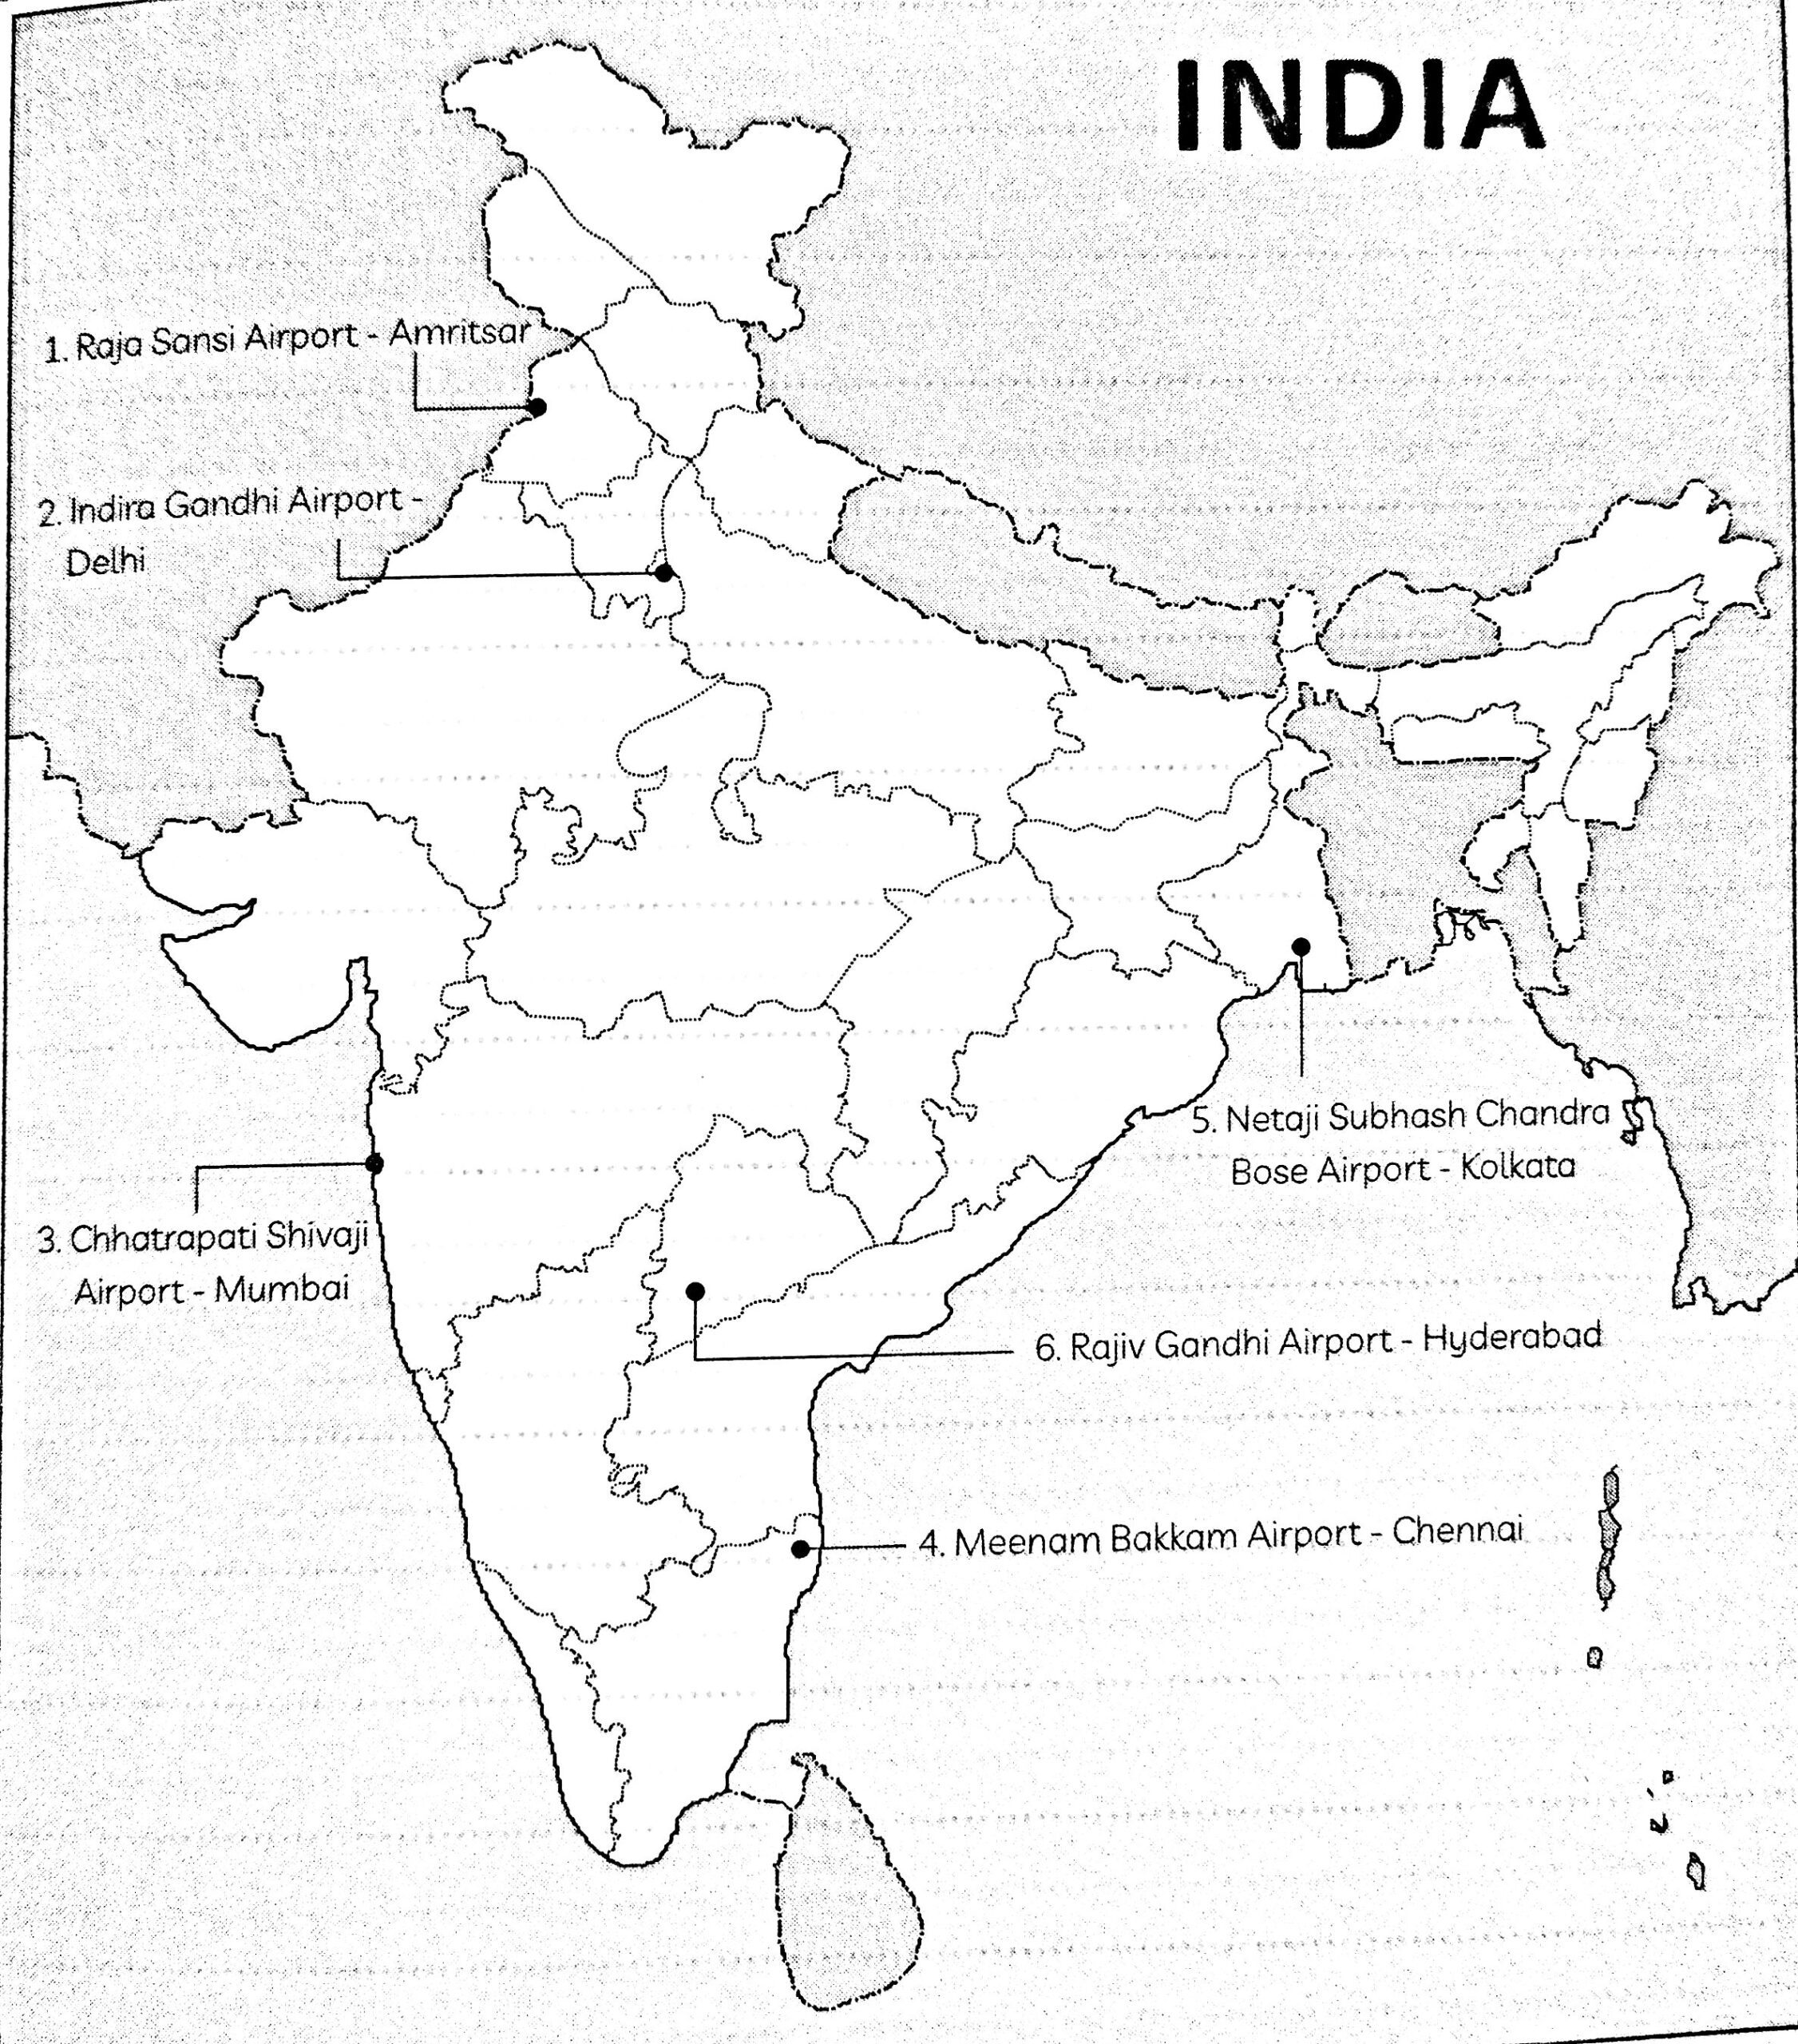 map work on major airports of India